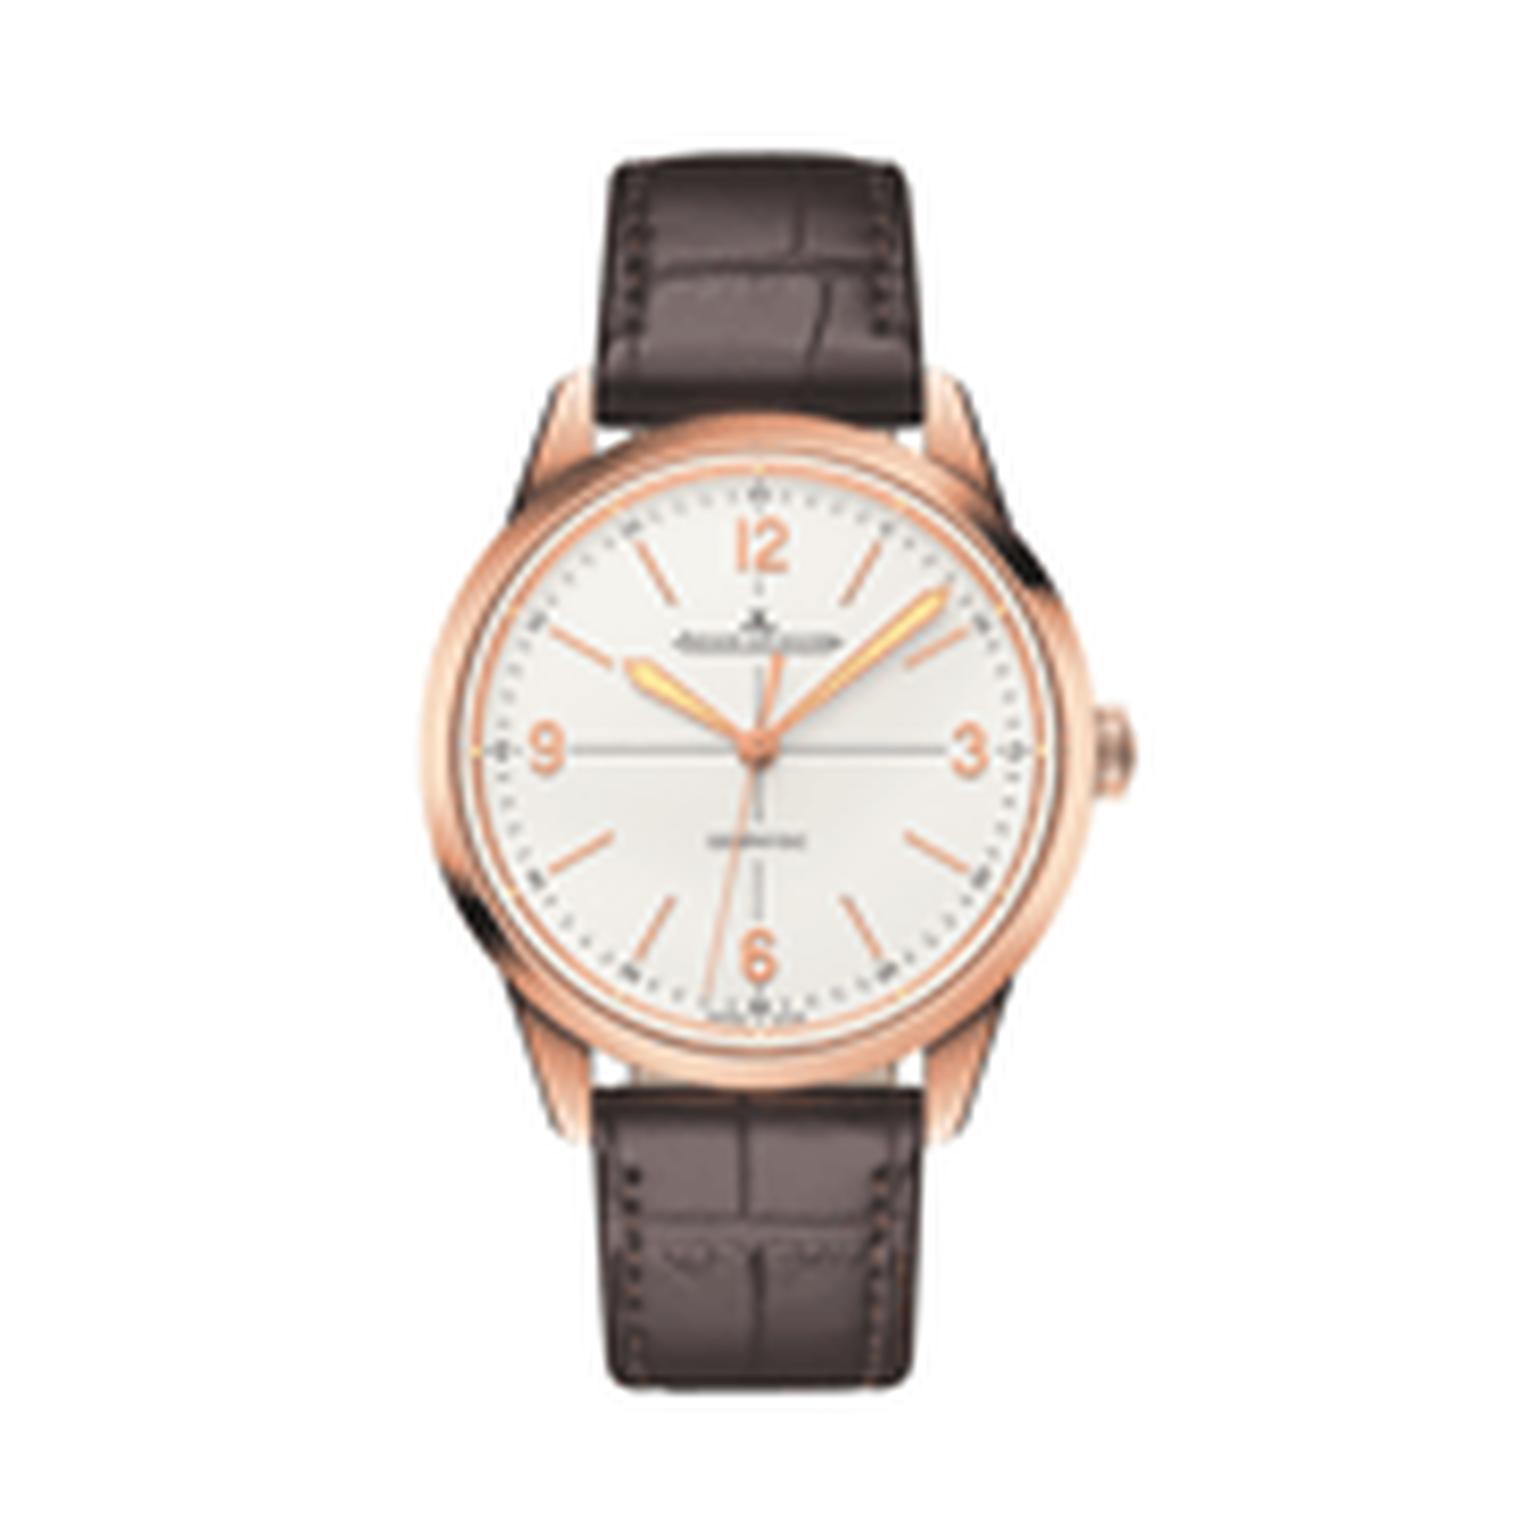 Jaeger LeCoultre Geophysic rose gold watch_thumb.jpg